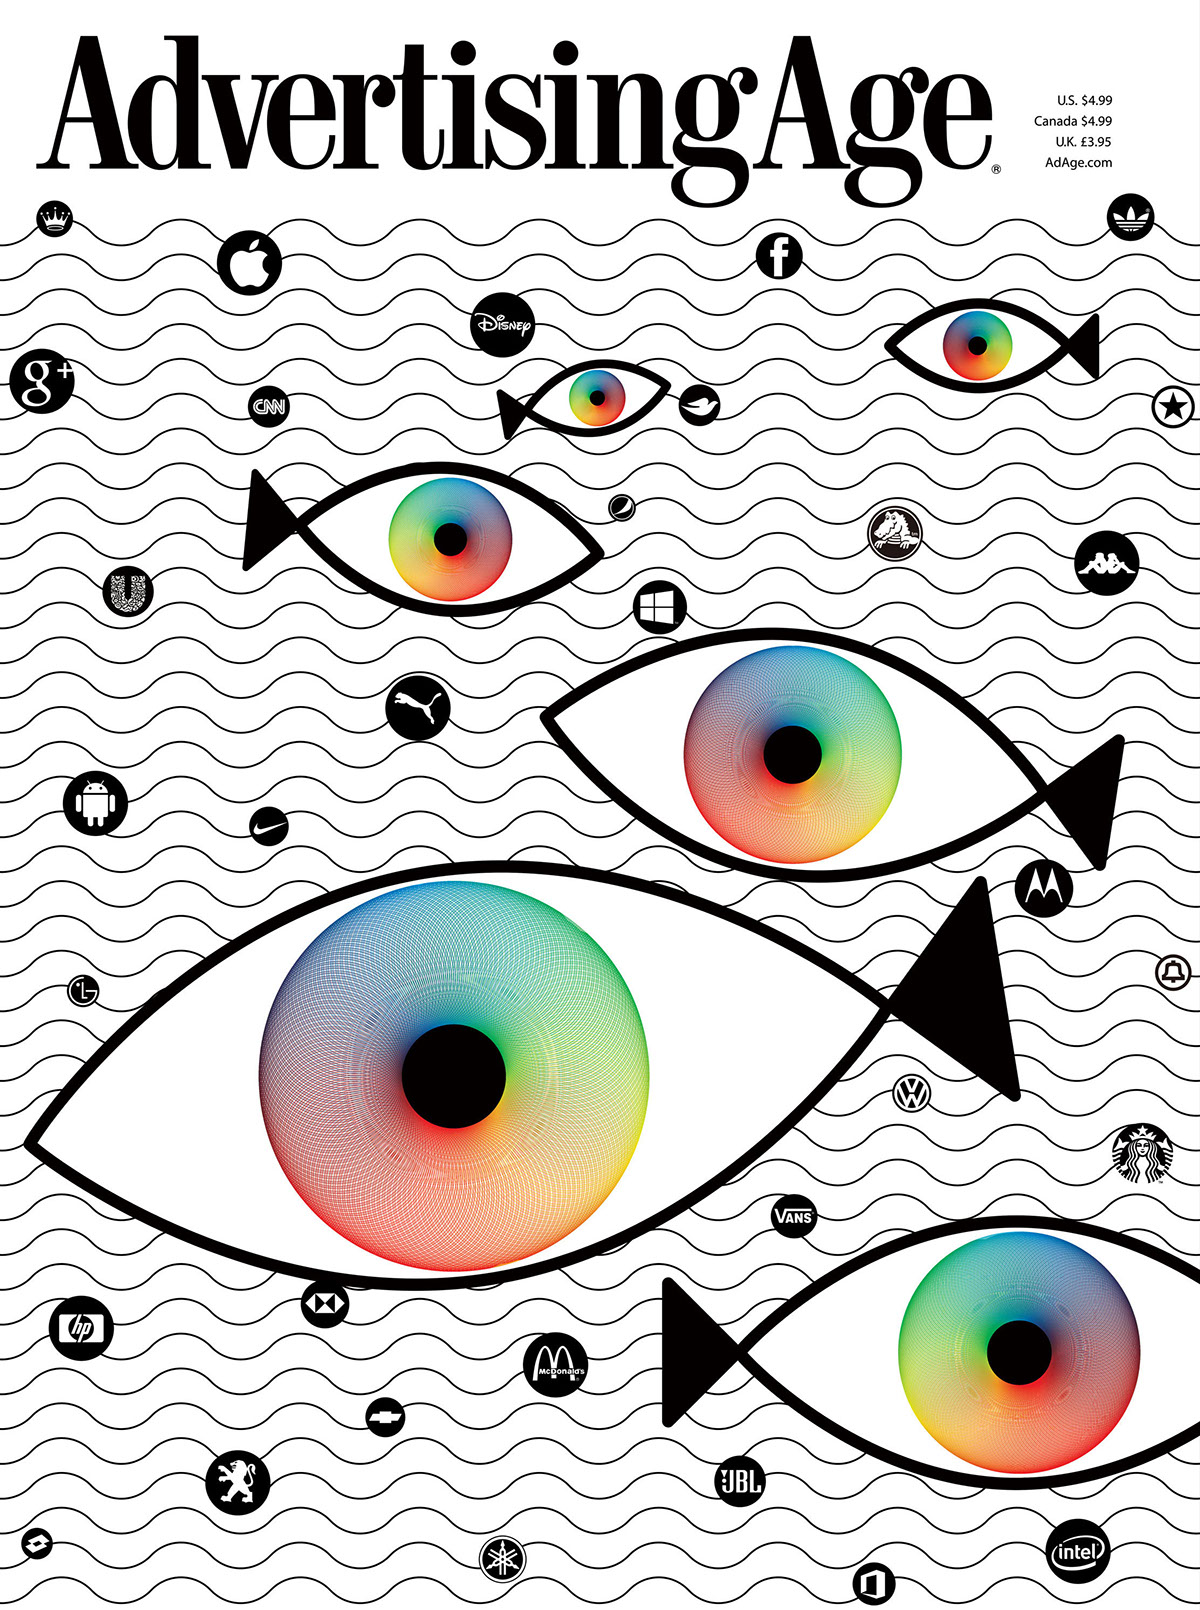 adage Advertising Age chemical reaction face blast COLOUR BLAST interconnectivity FISHING FOR EYEBALLS eyeball fish collage human face